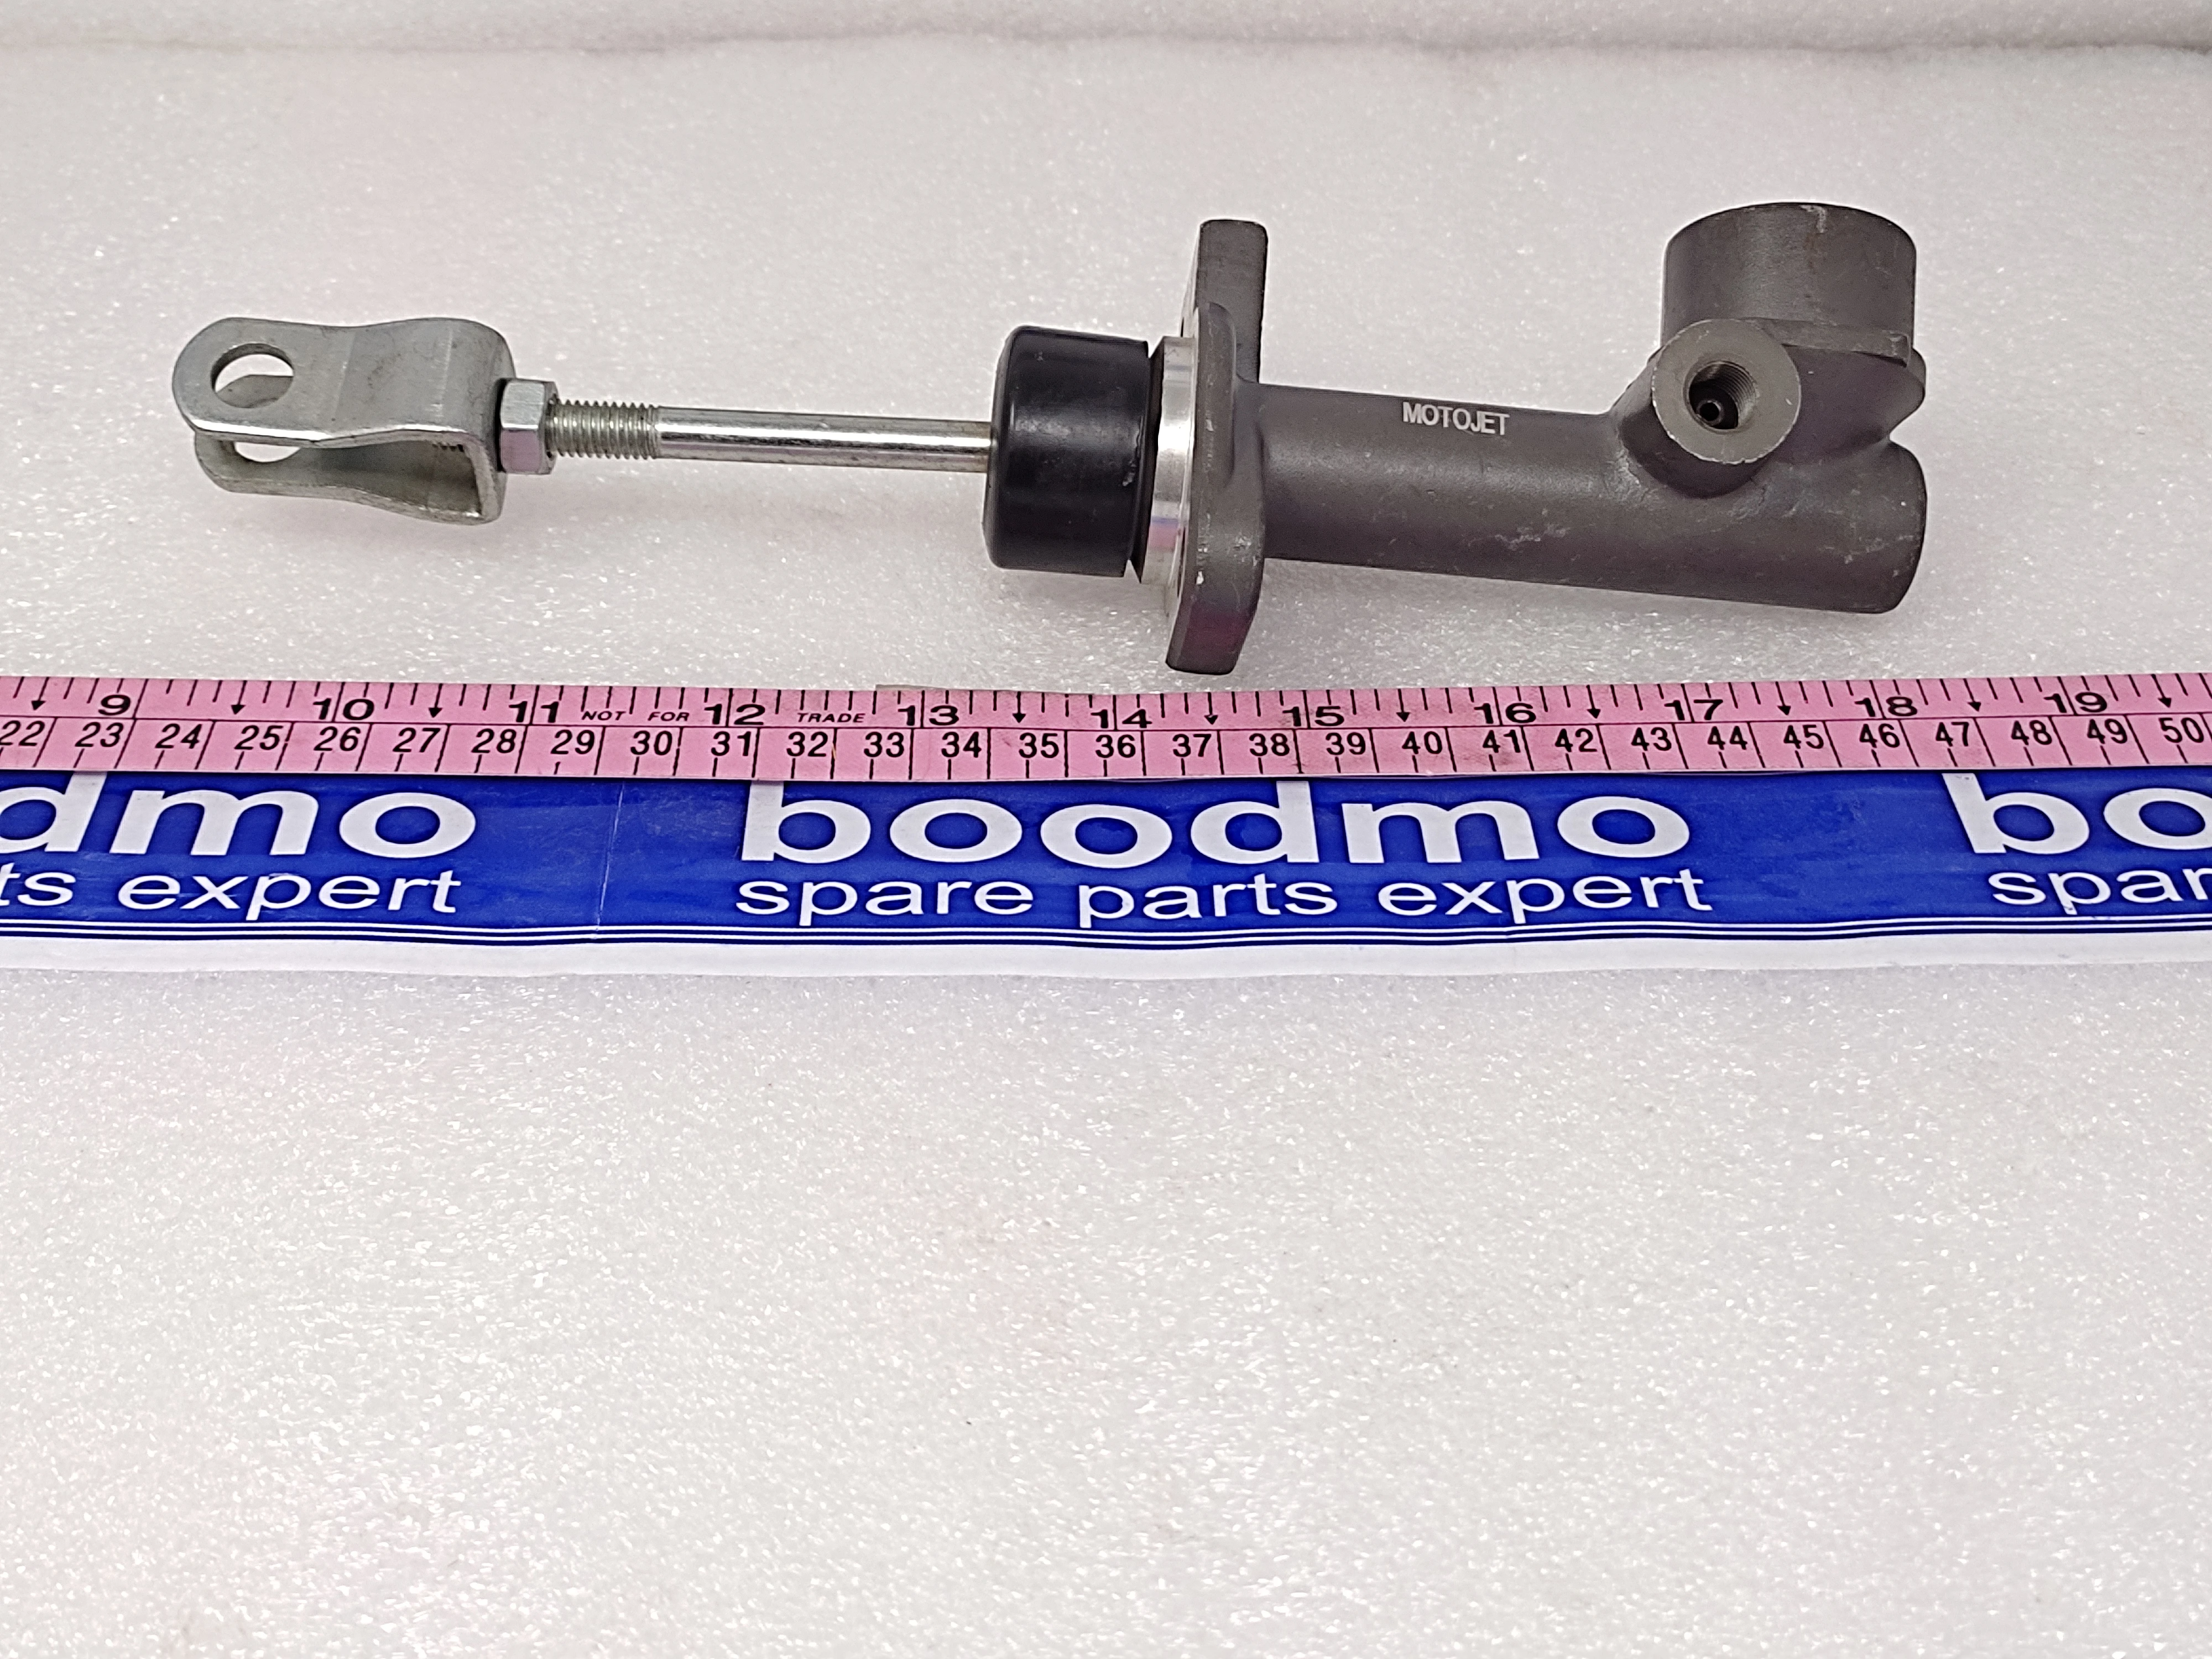 Clutch Cylinder Assembly: MotoJet 5819 -compatibility, features, prices.  boodmo